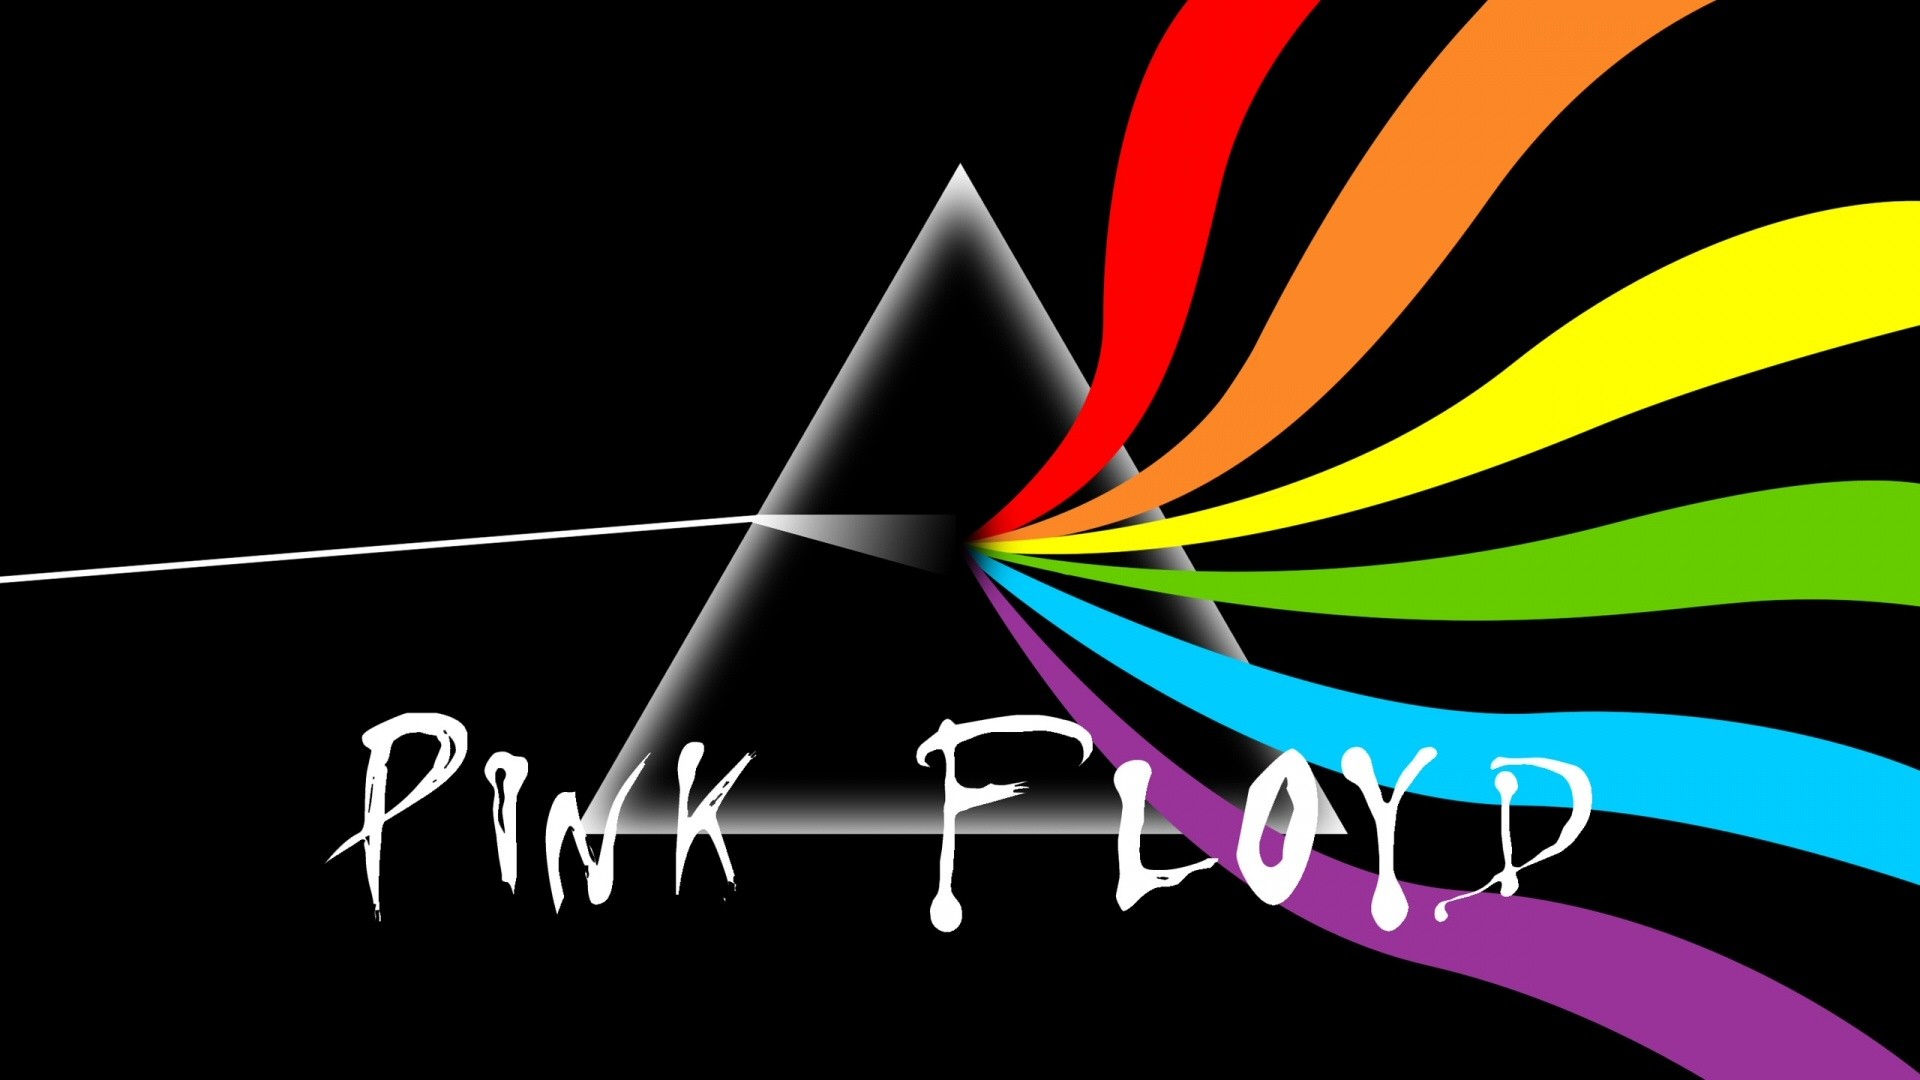 1920x1080 Wallpapers For > Pink Floyd Iphone Wallpaper The Wall